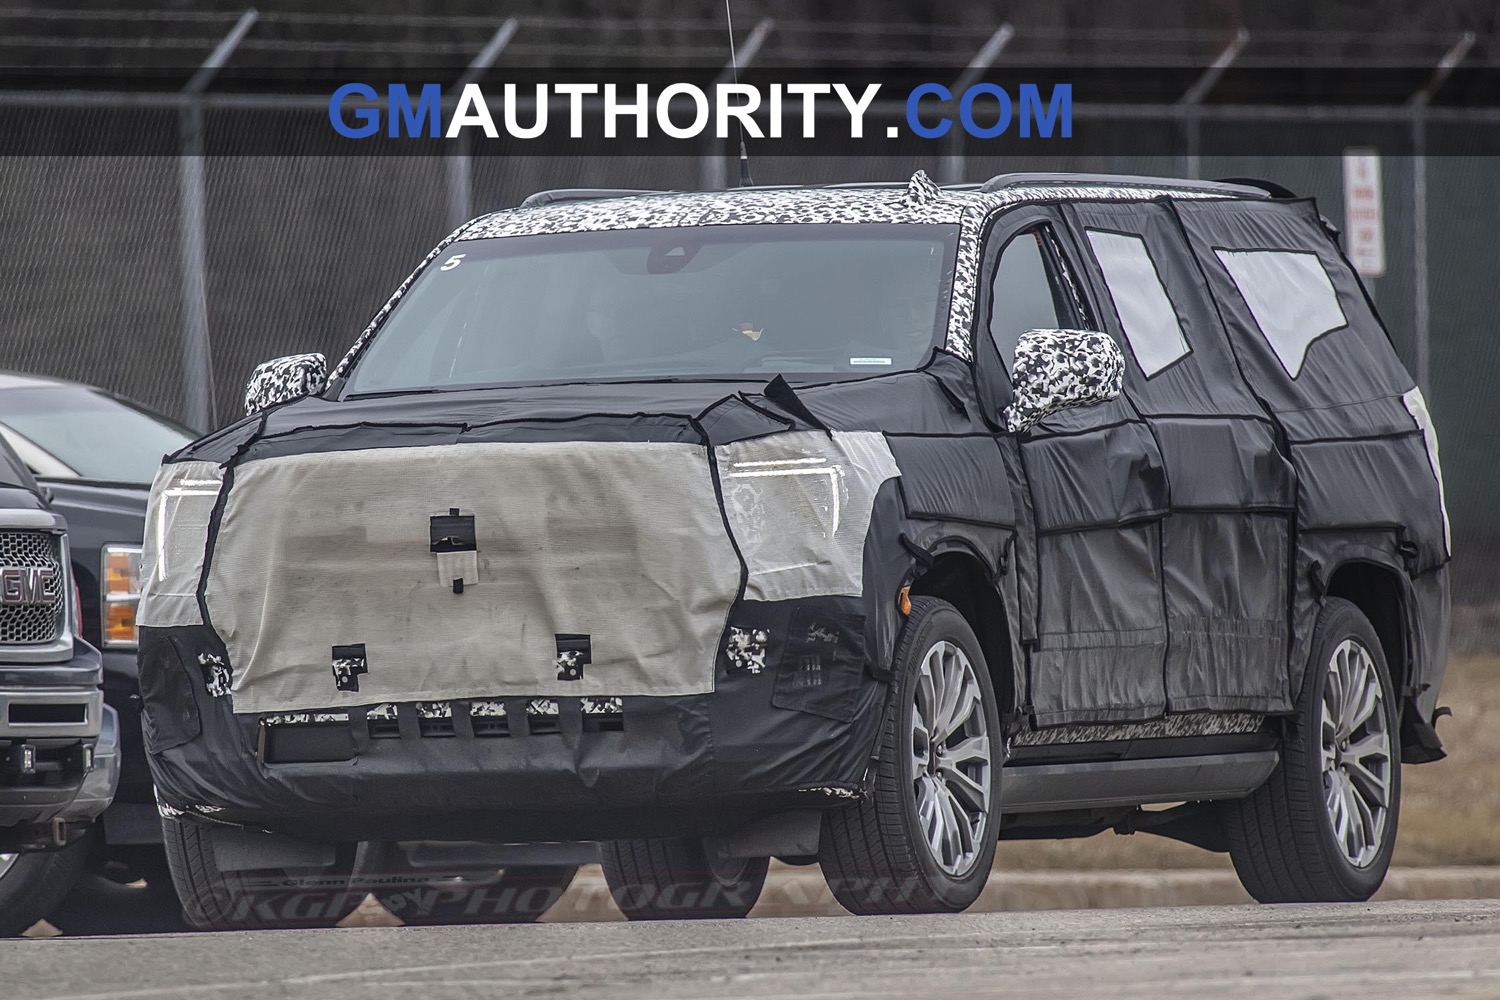 New Pepperdust Metallic Color For 2019 GMC Yukon: First ...